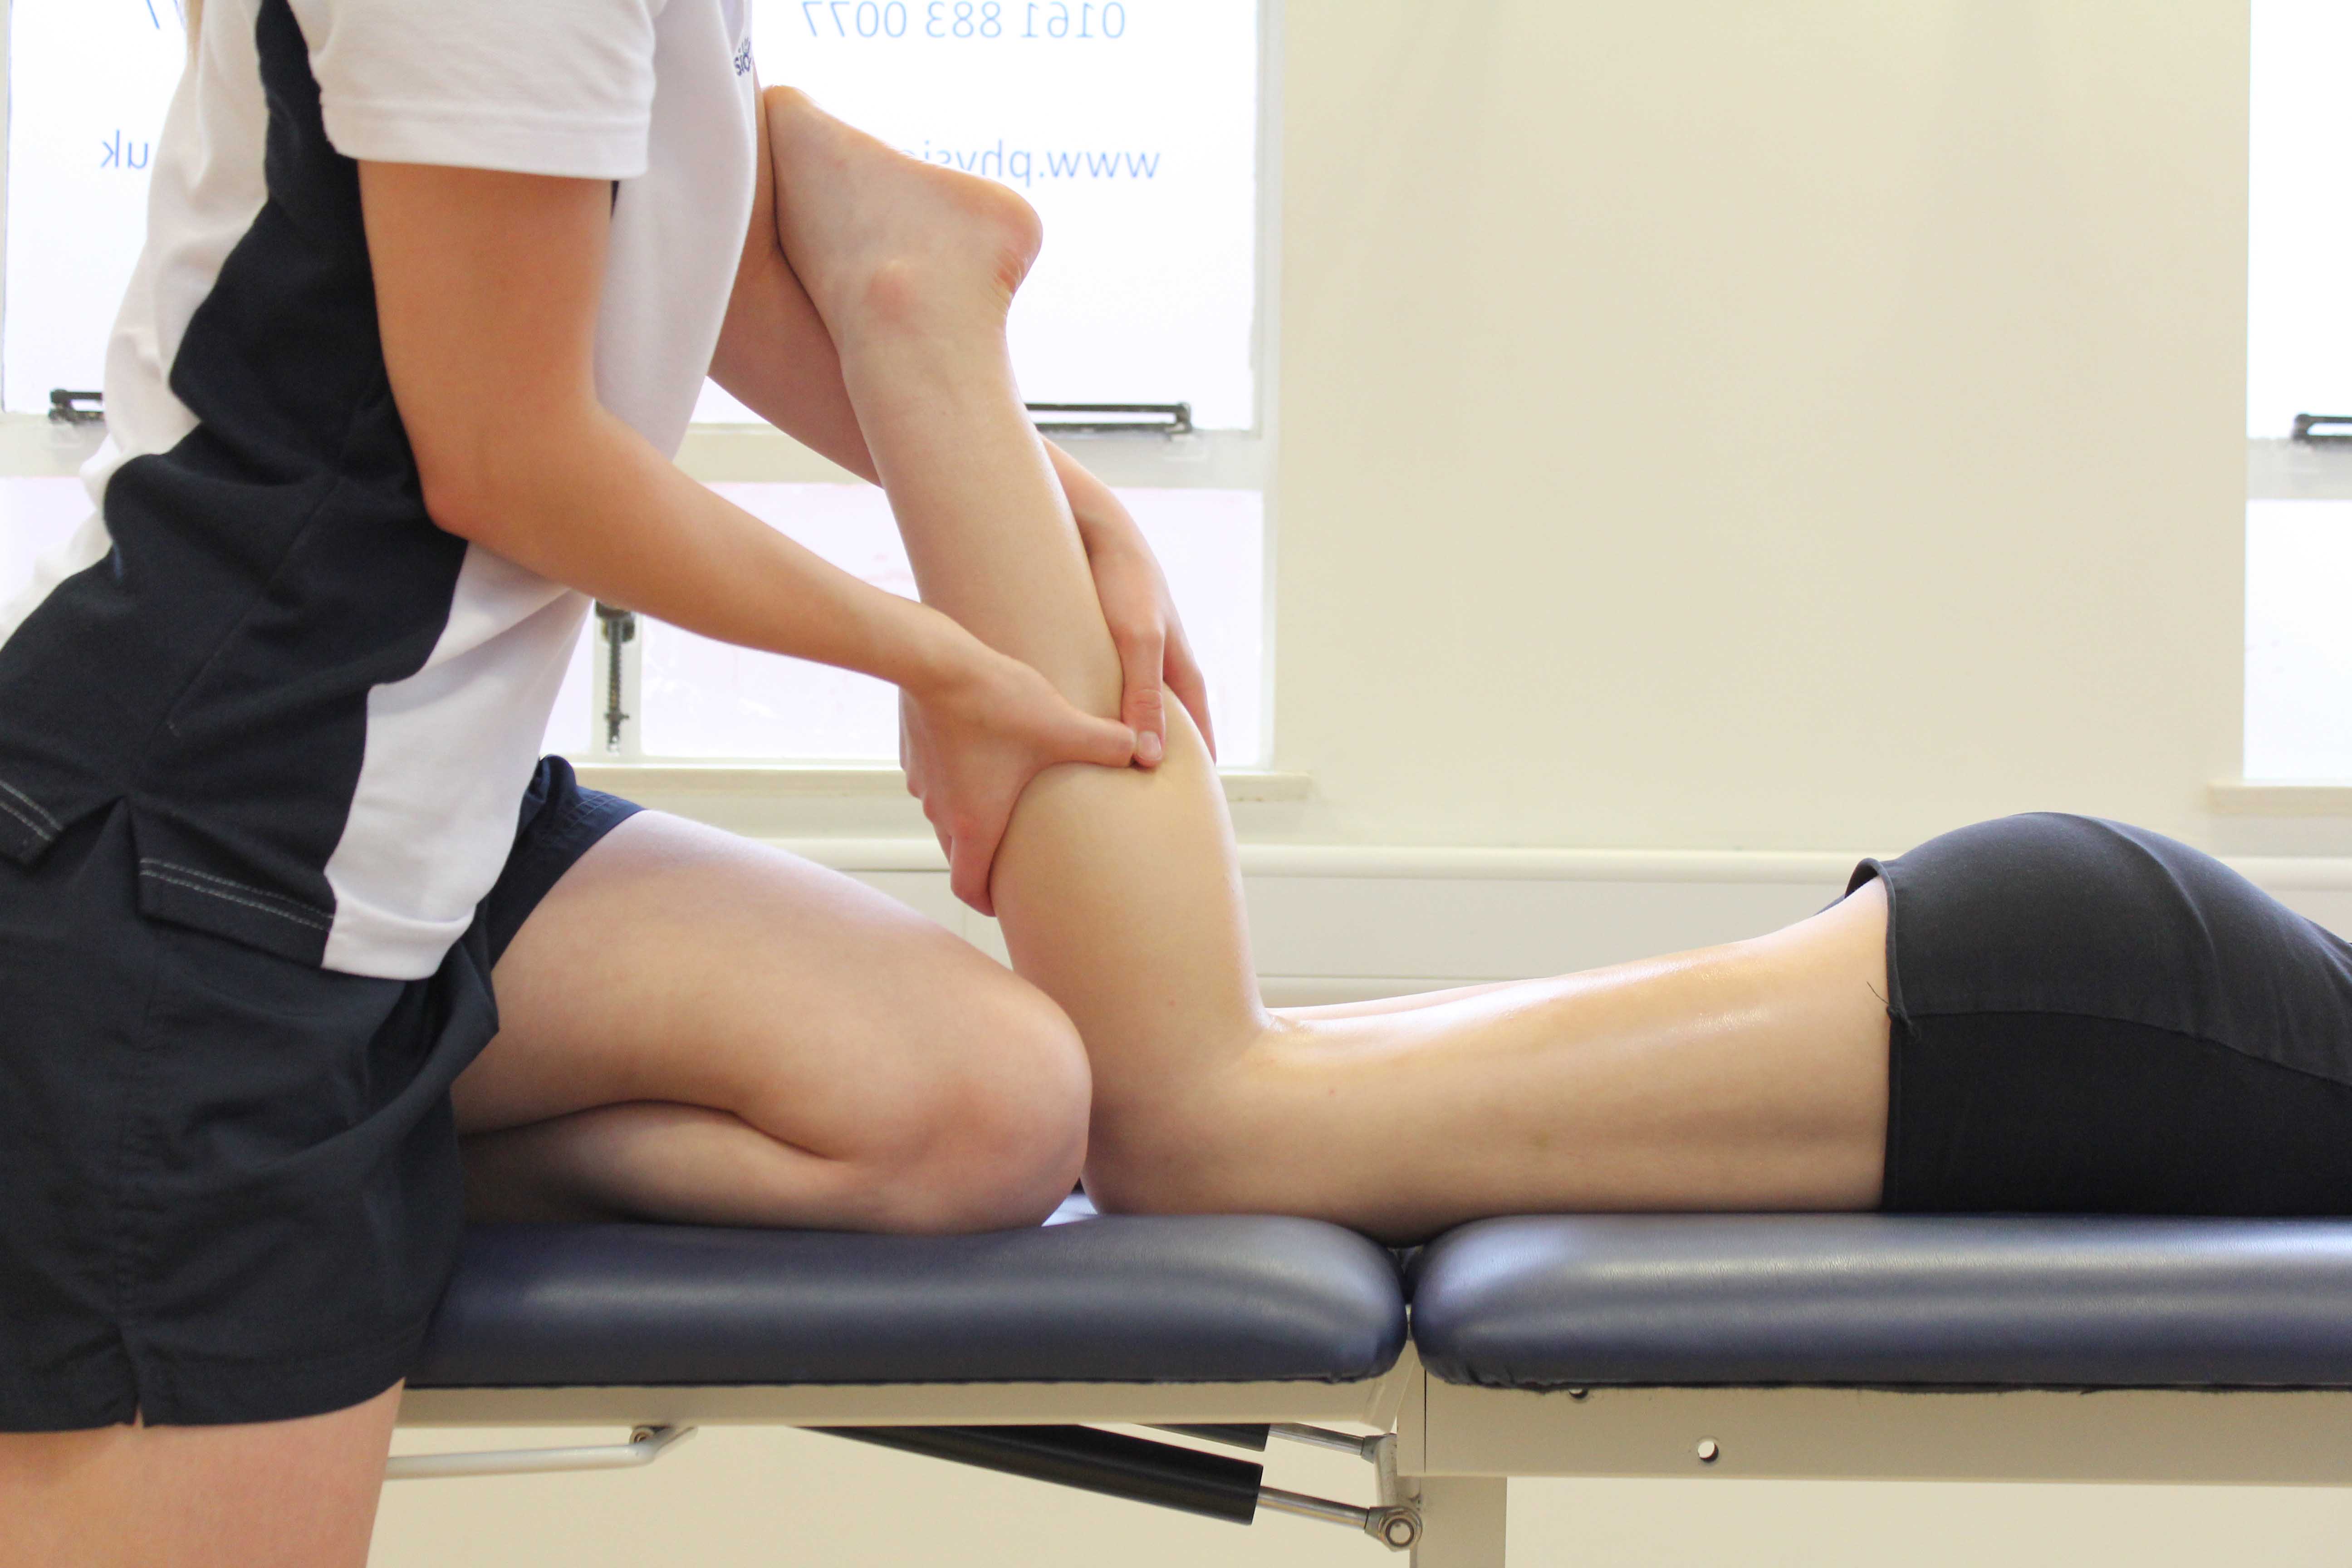 Torn Calf Muscle: Causes, Treatment & Recovery